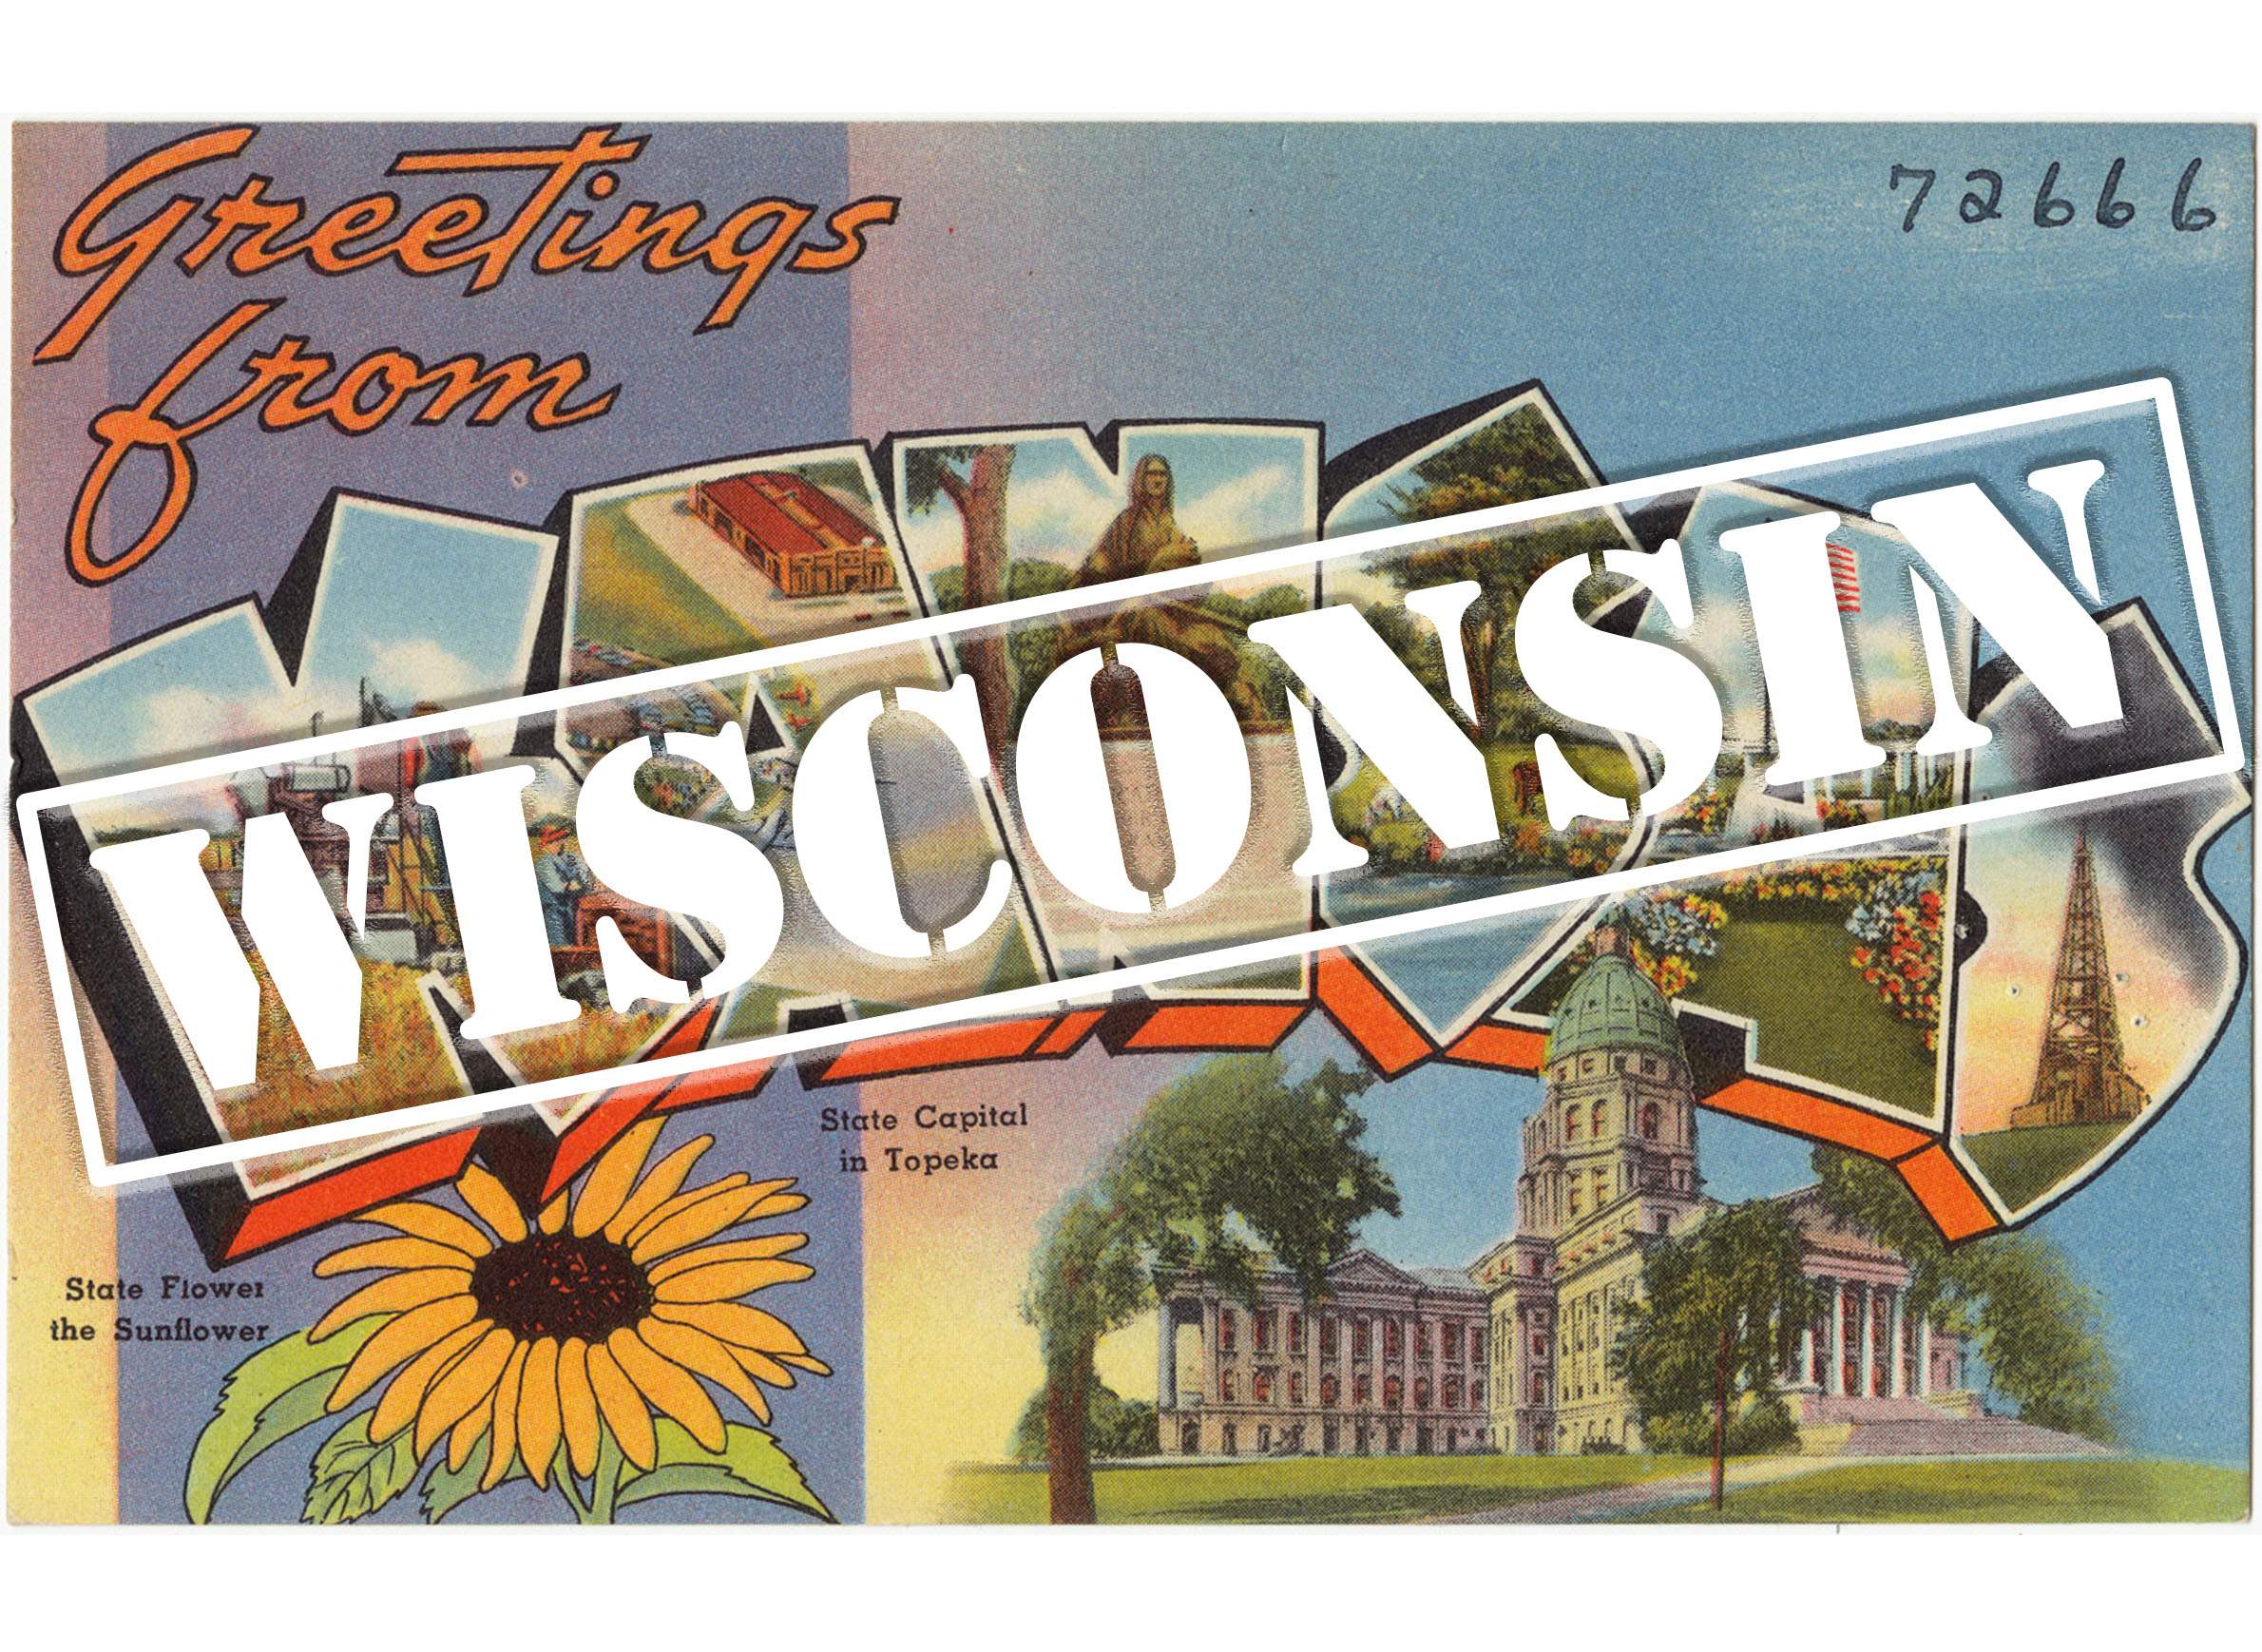 Greetings from Wisconsin postcard